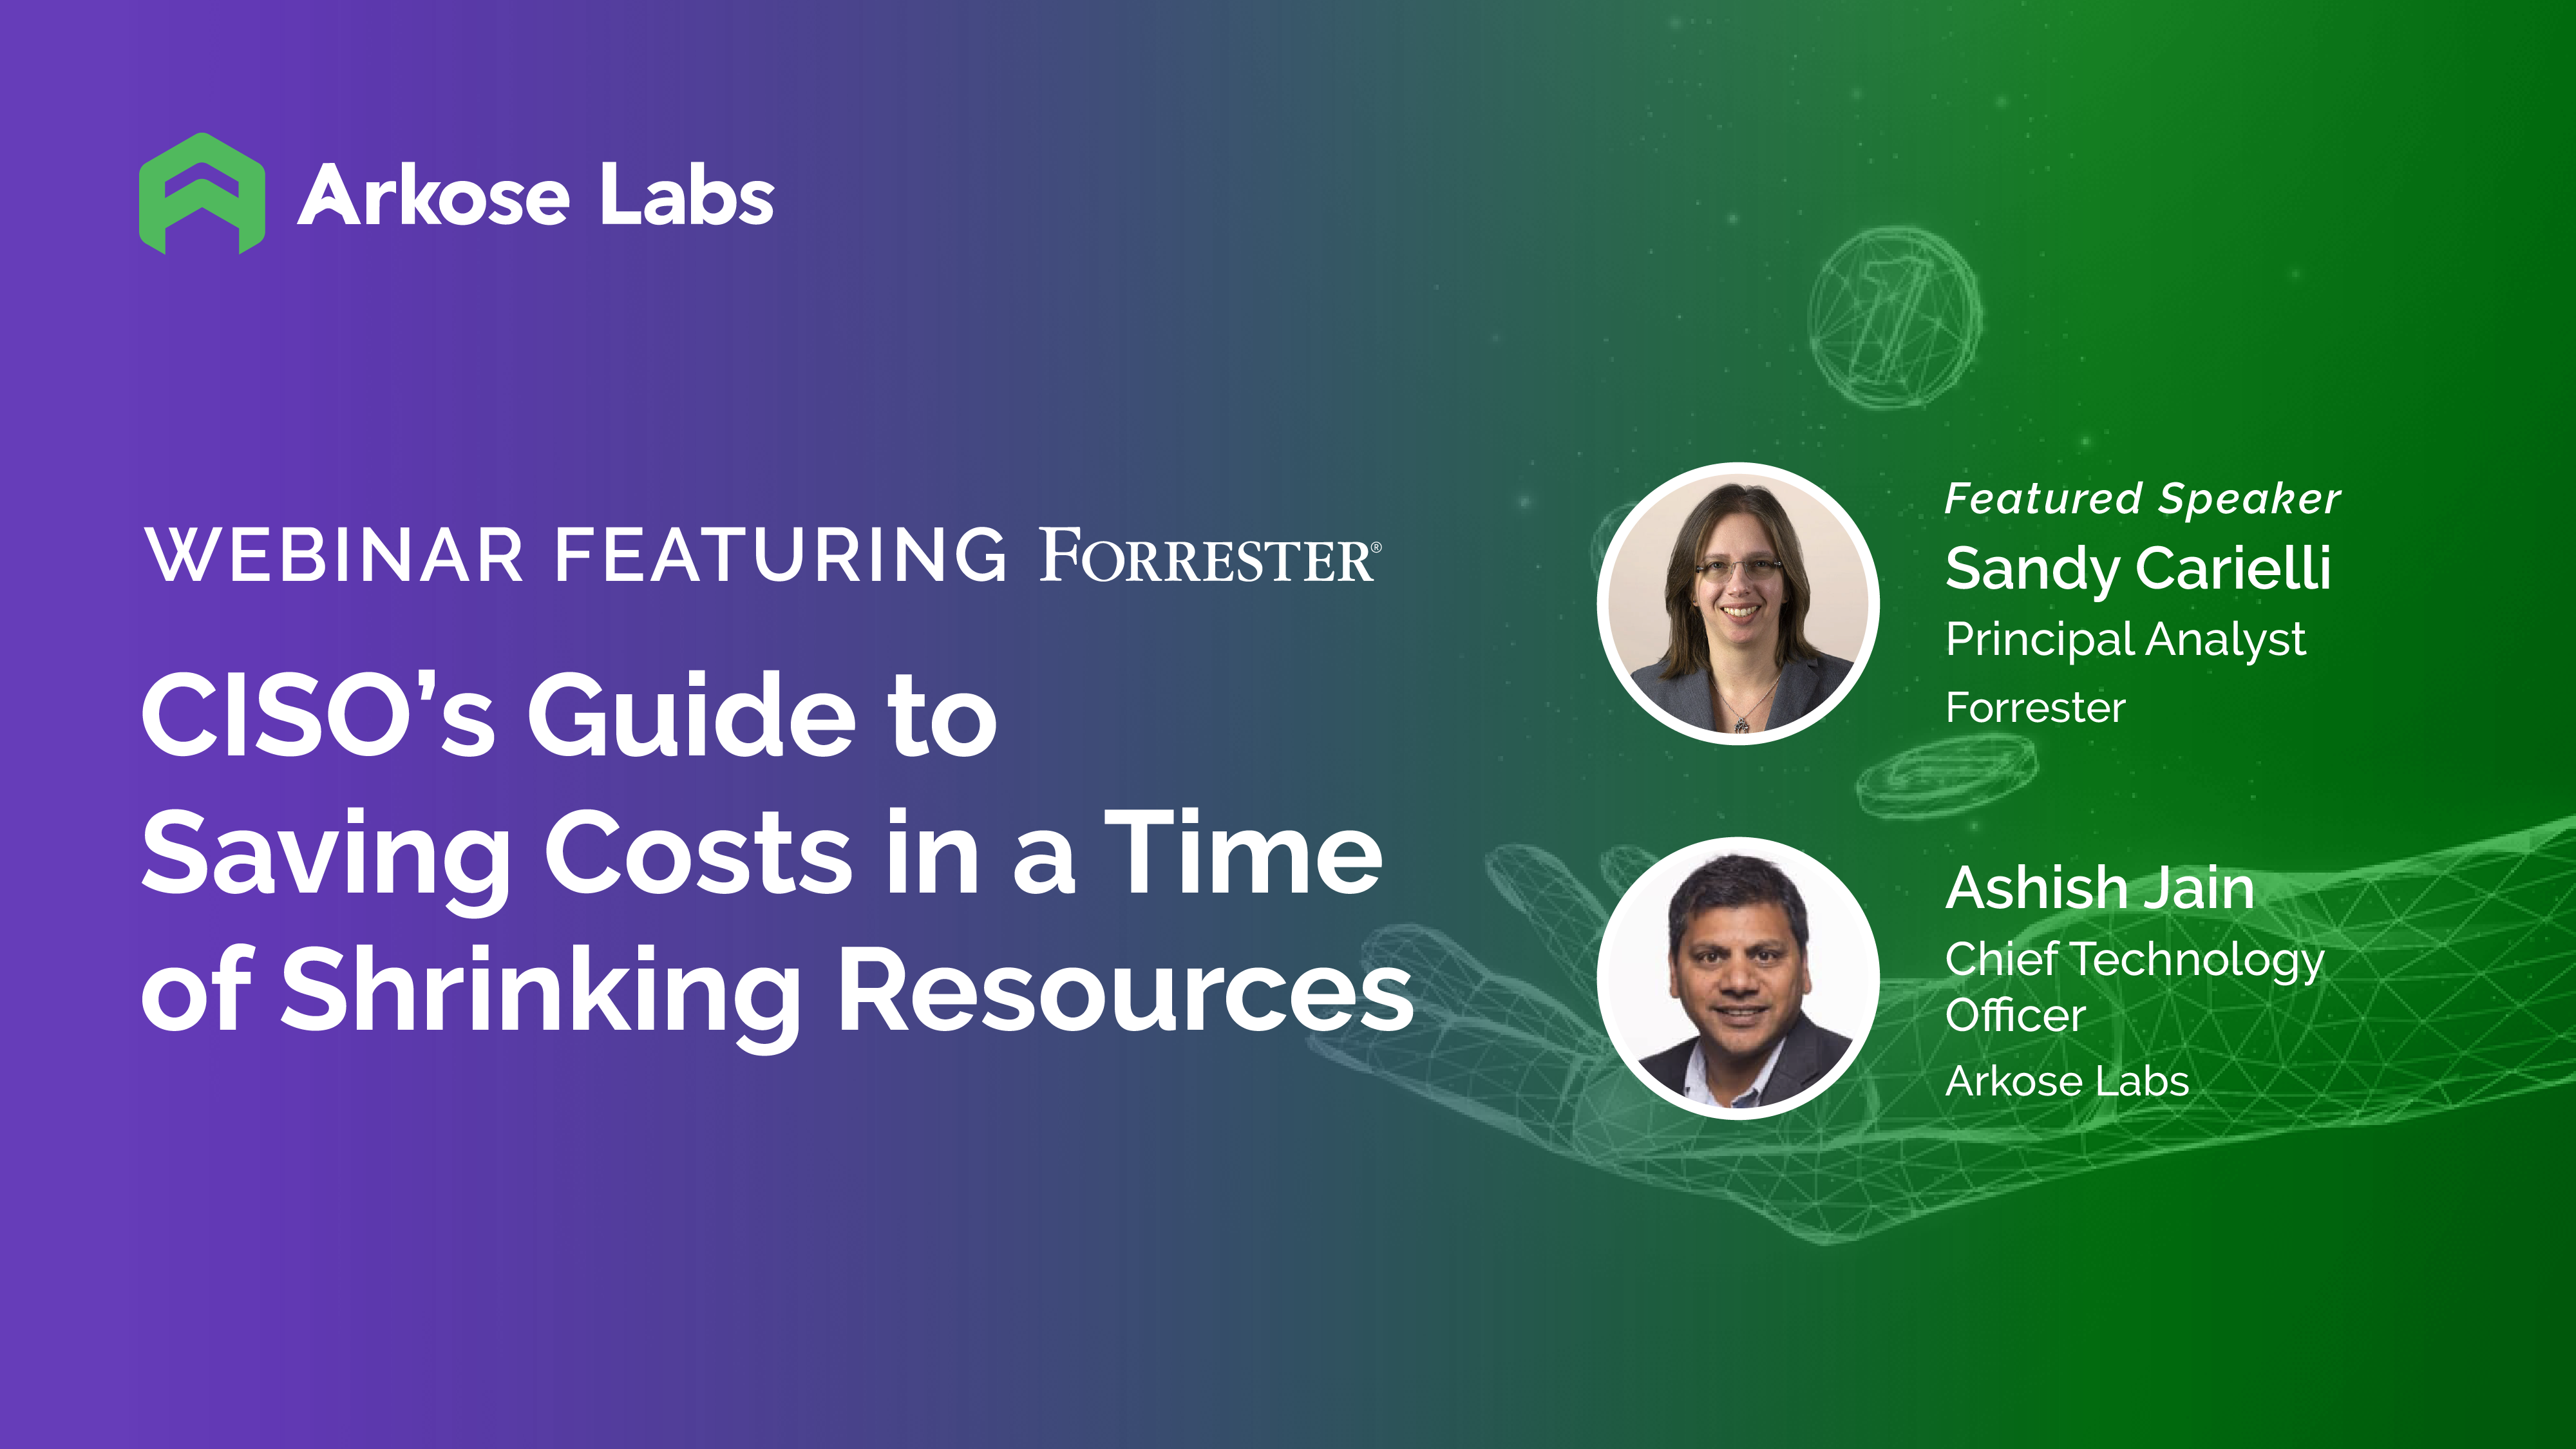 A CISO’s Guide to Saving Costs in a Time of Shrinking Resources